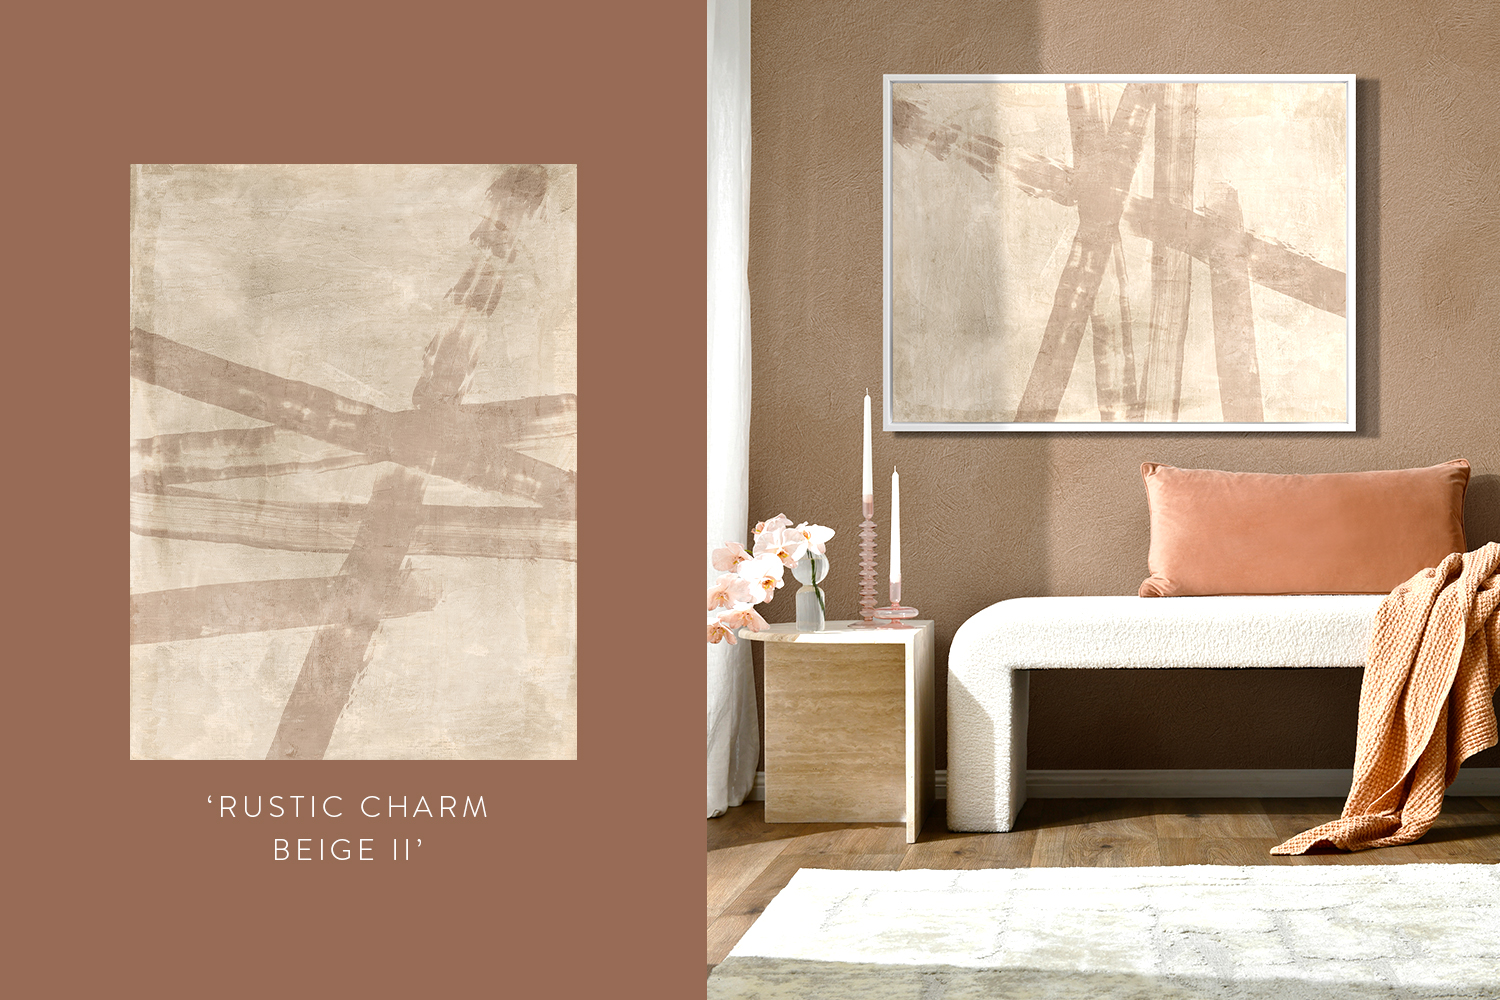 Rustic Charm from the unearthed collection